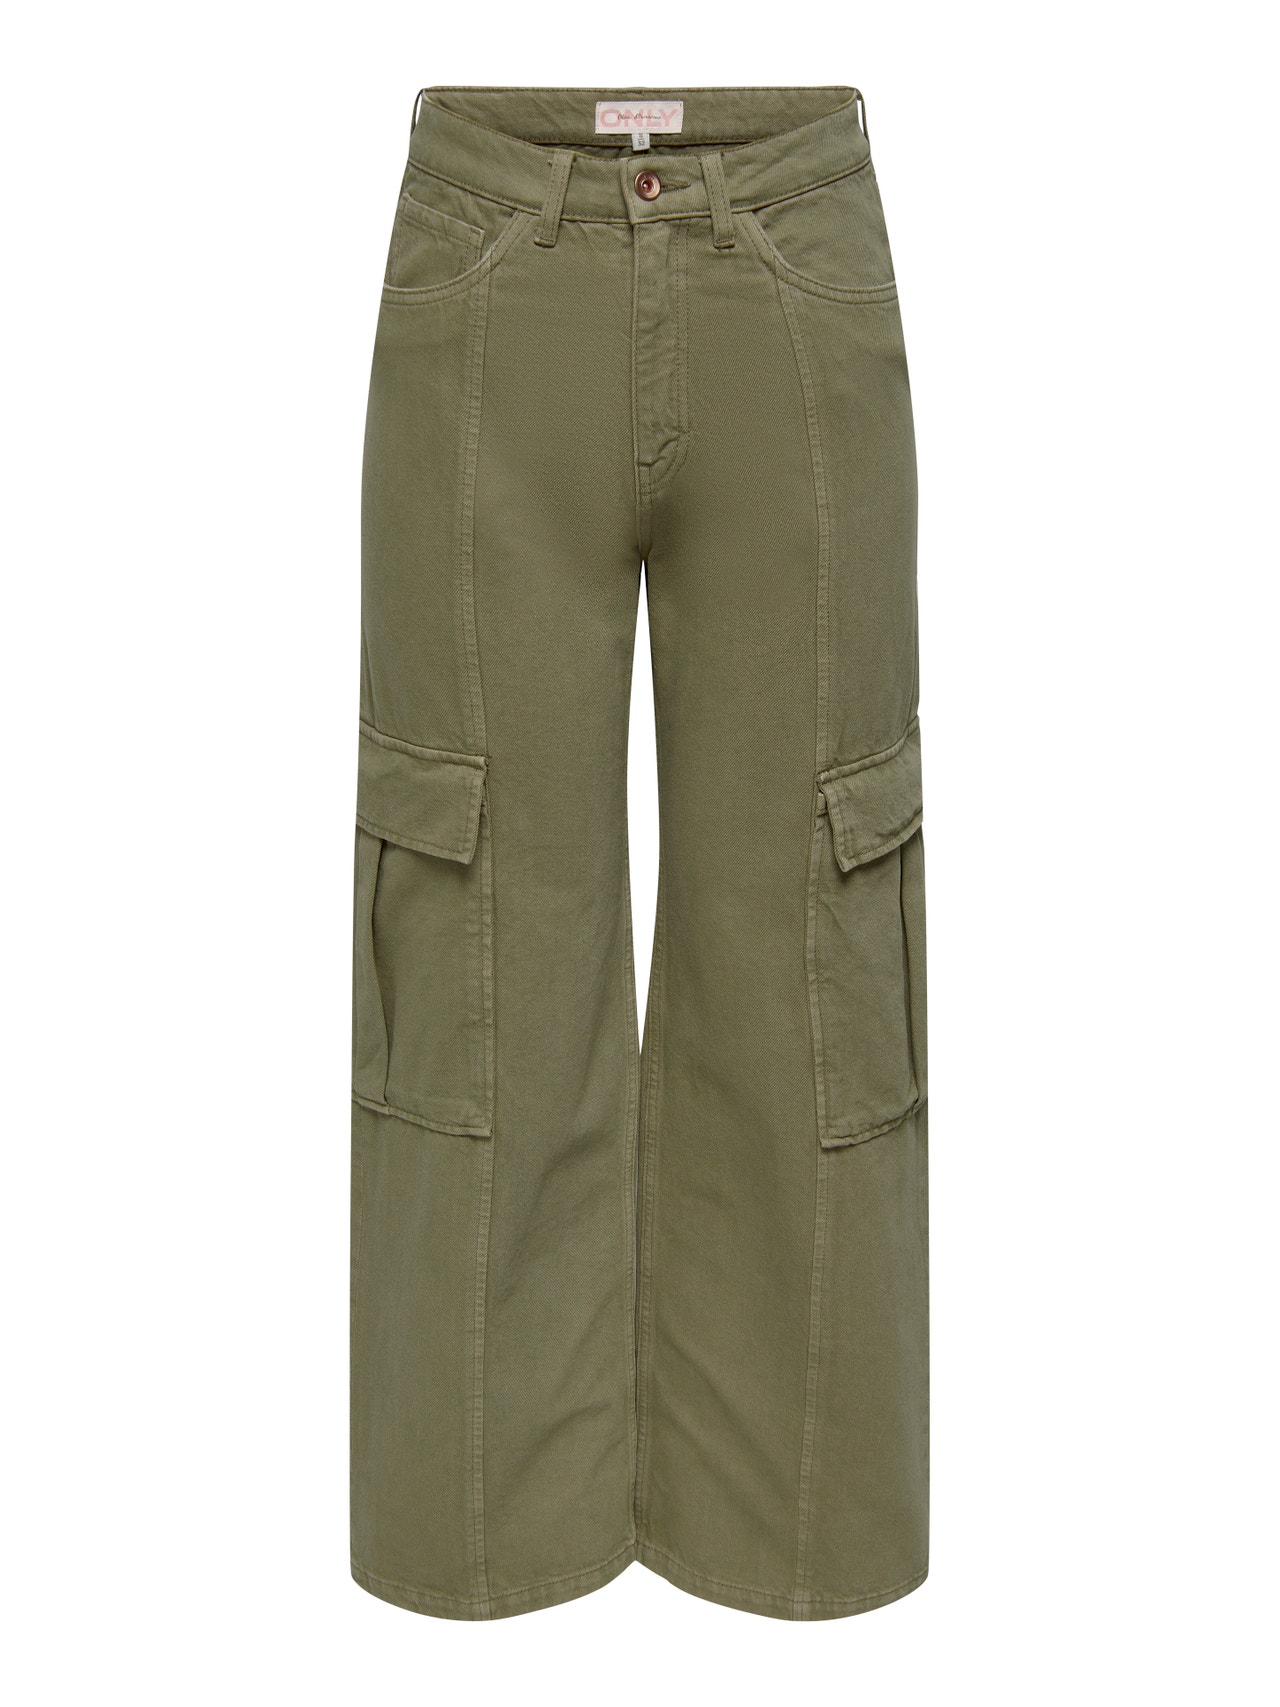 ONLY Cargo trousers with high waist -Aloe - 15278721